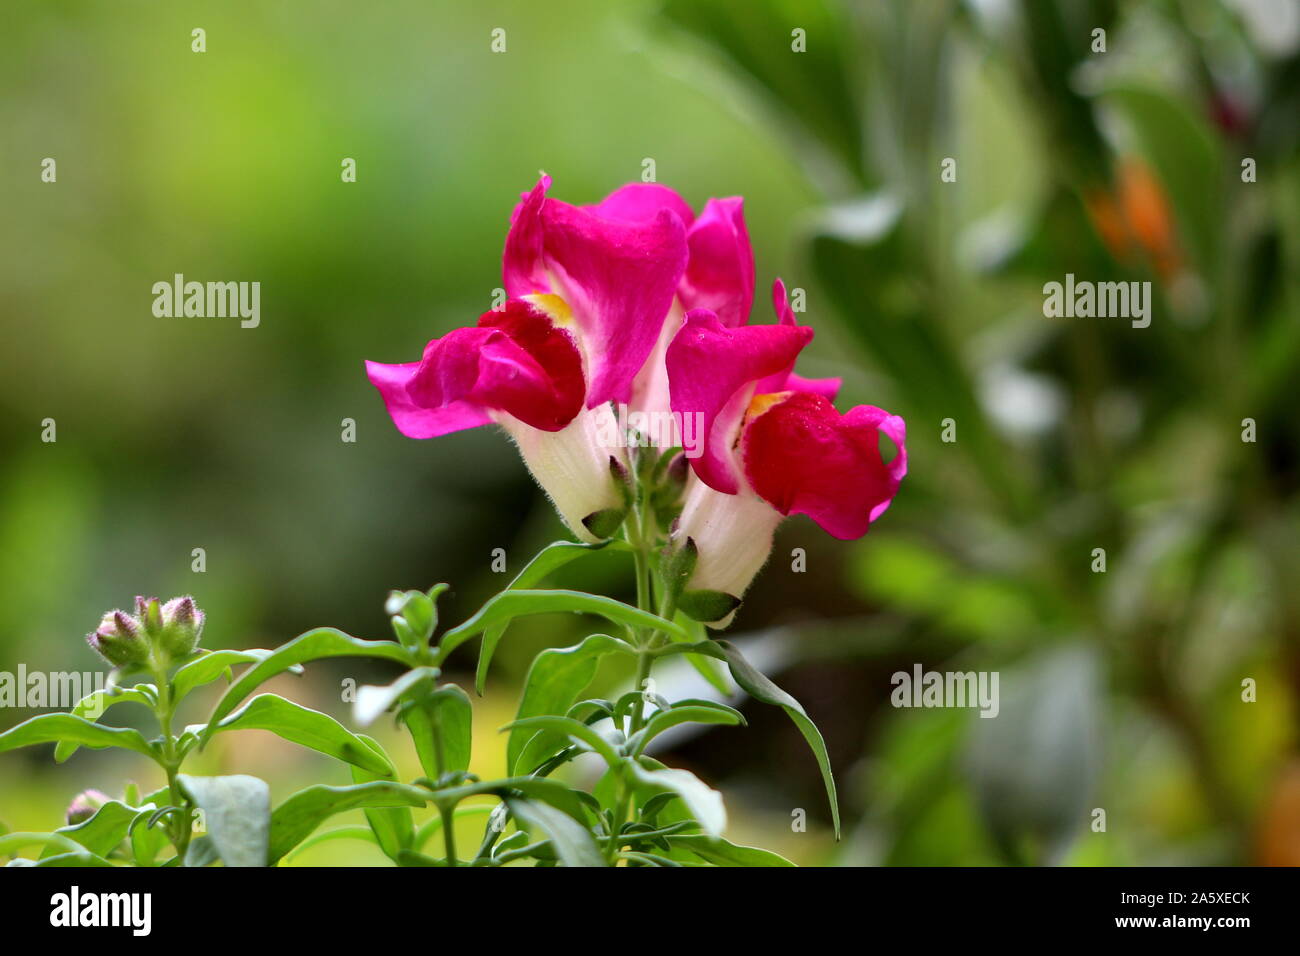 Common snapdragon or Antirrhinum majus herbaceous perennial plant with small fully open blooming dark pink and white flowers surrounded with green Stock Photo